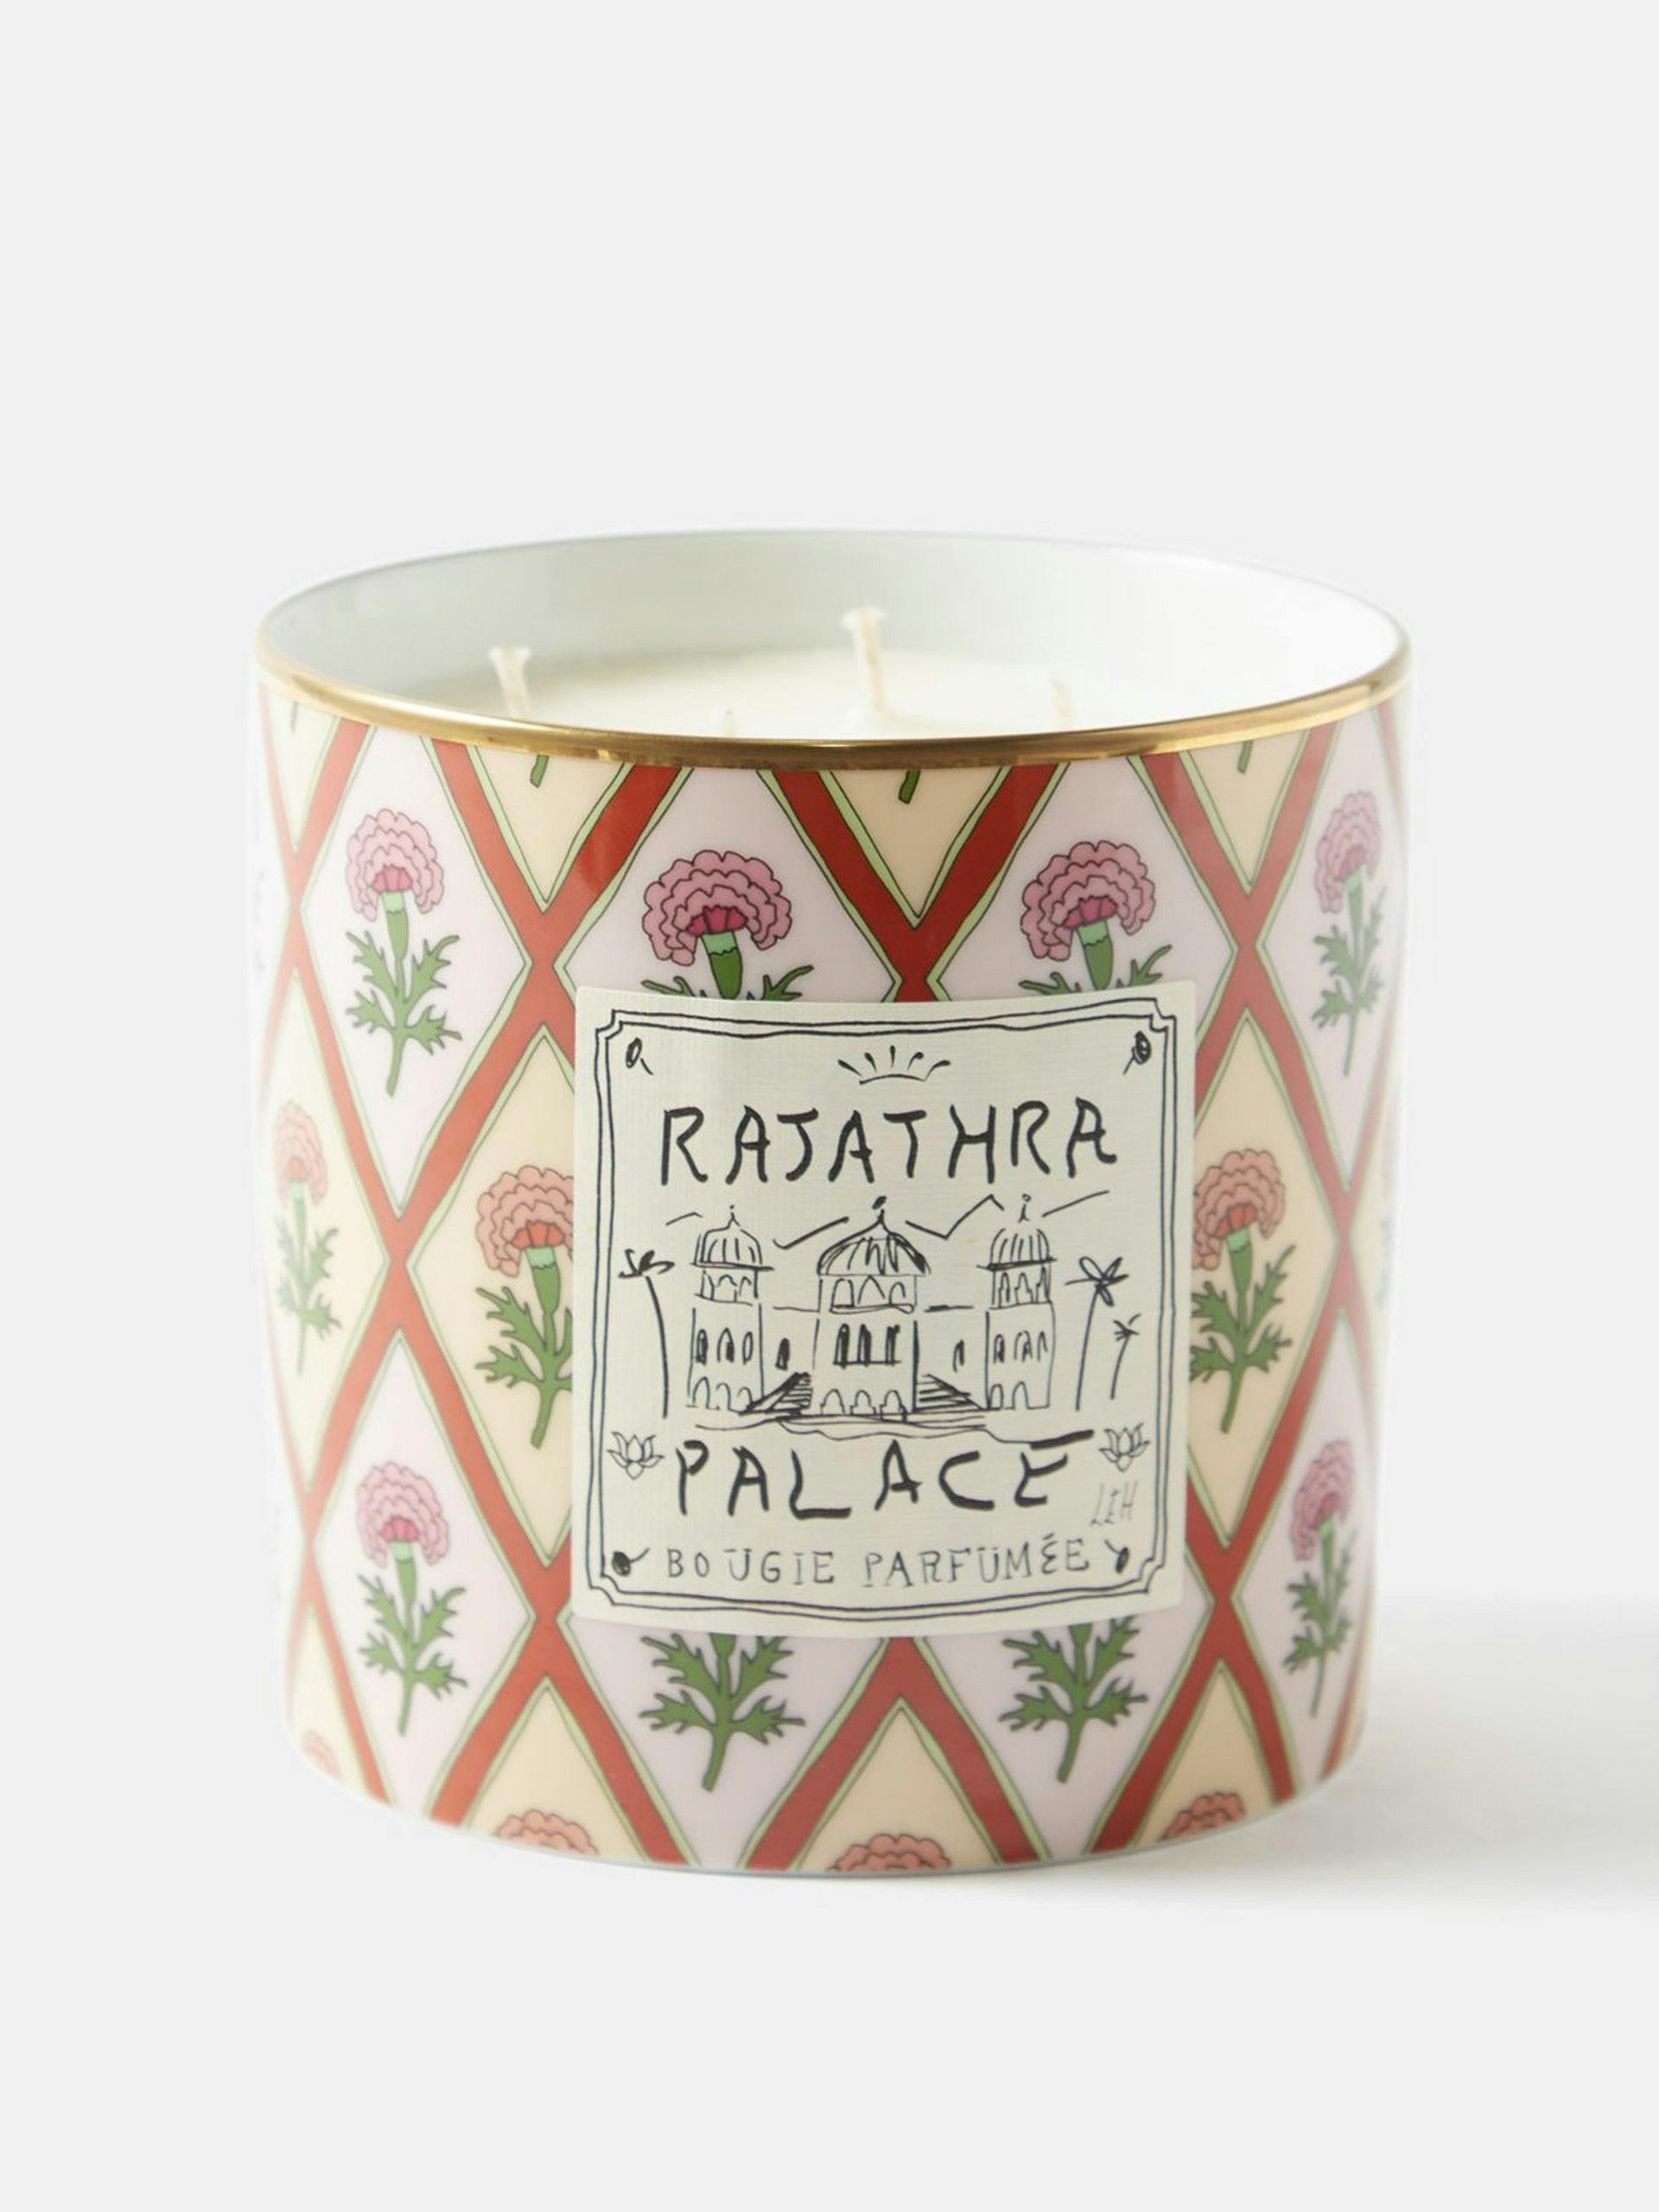 Rajathra Palace scented candle